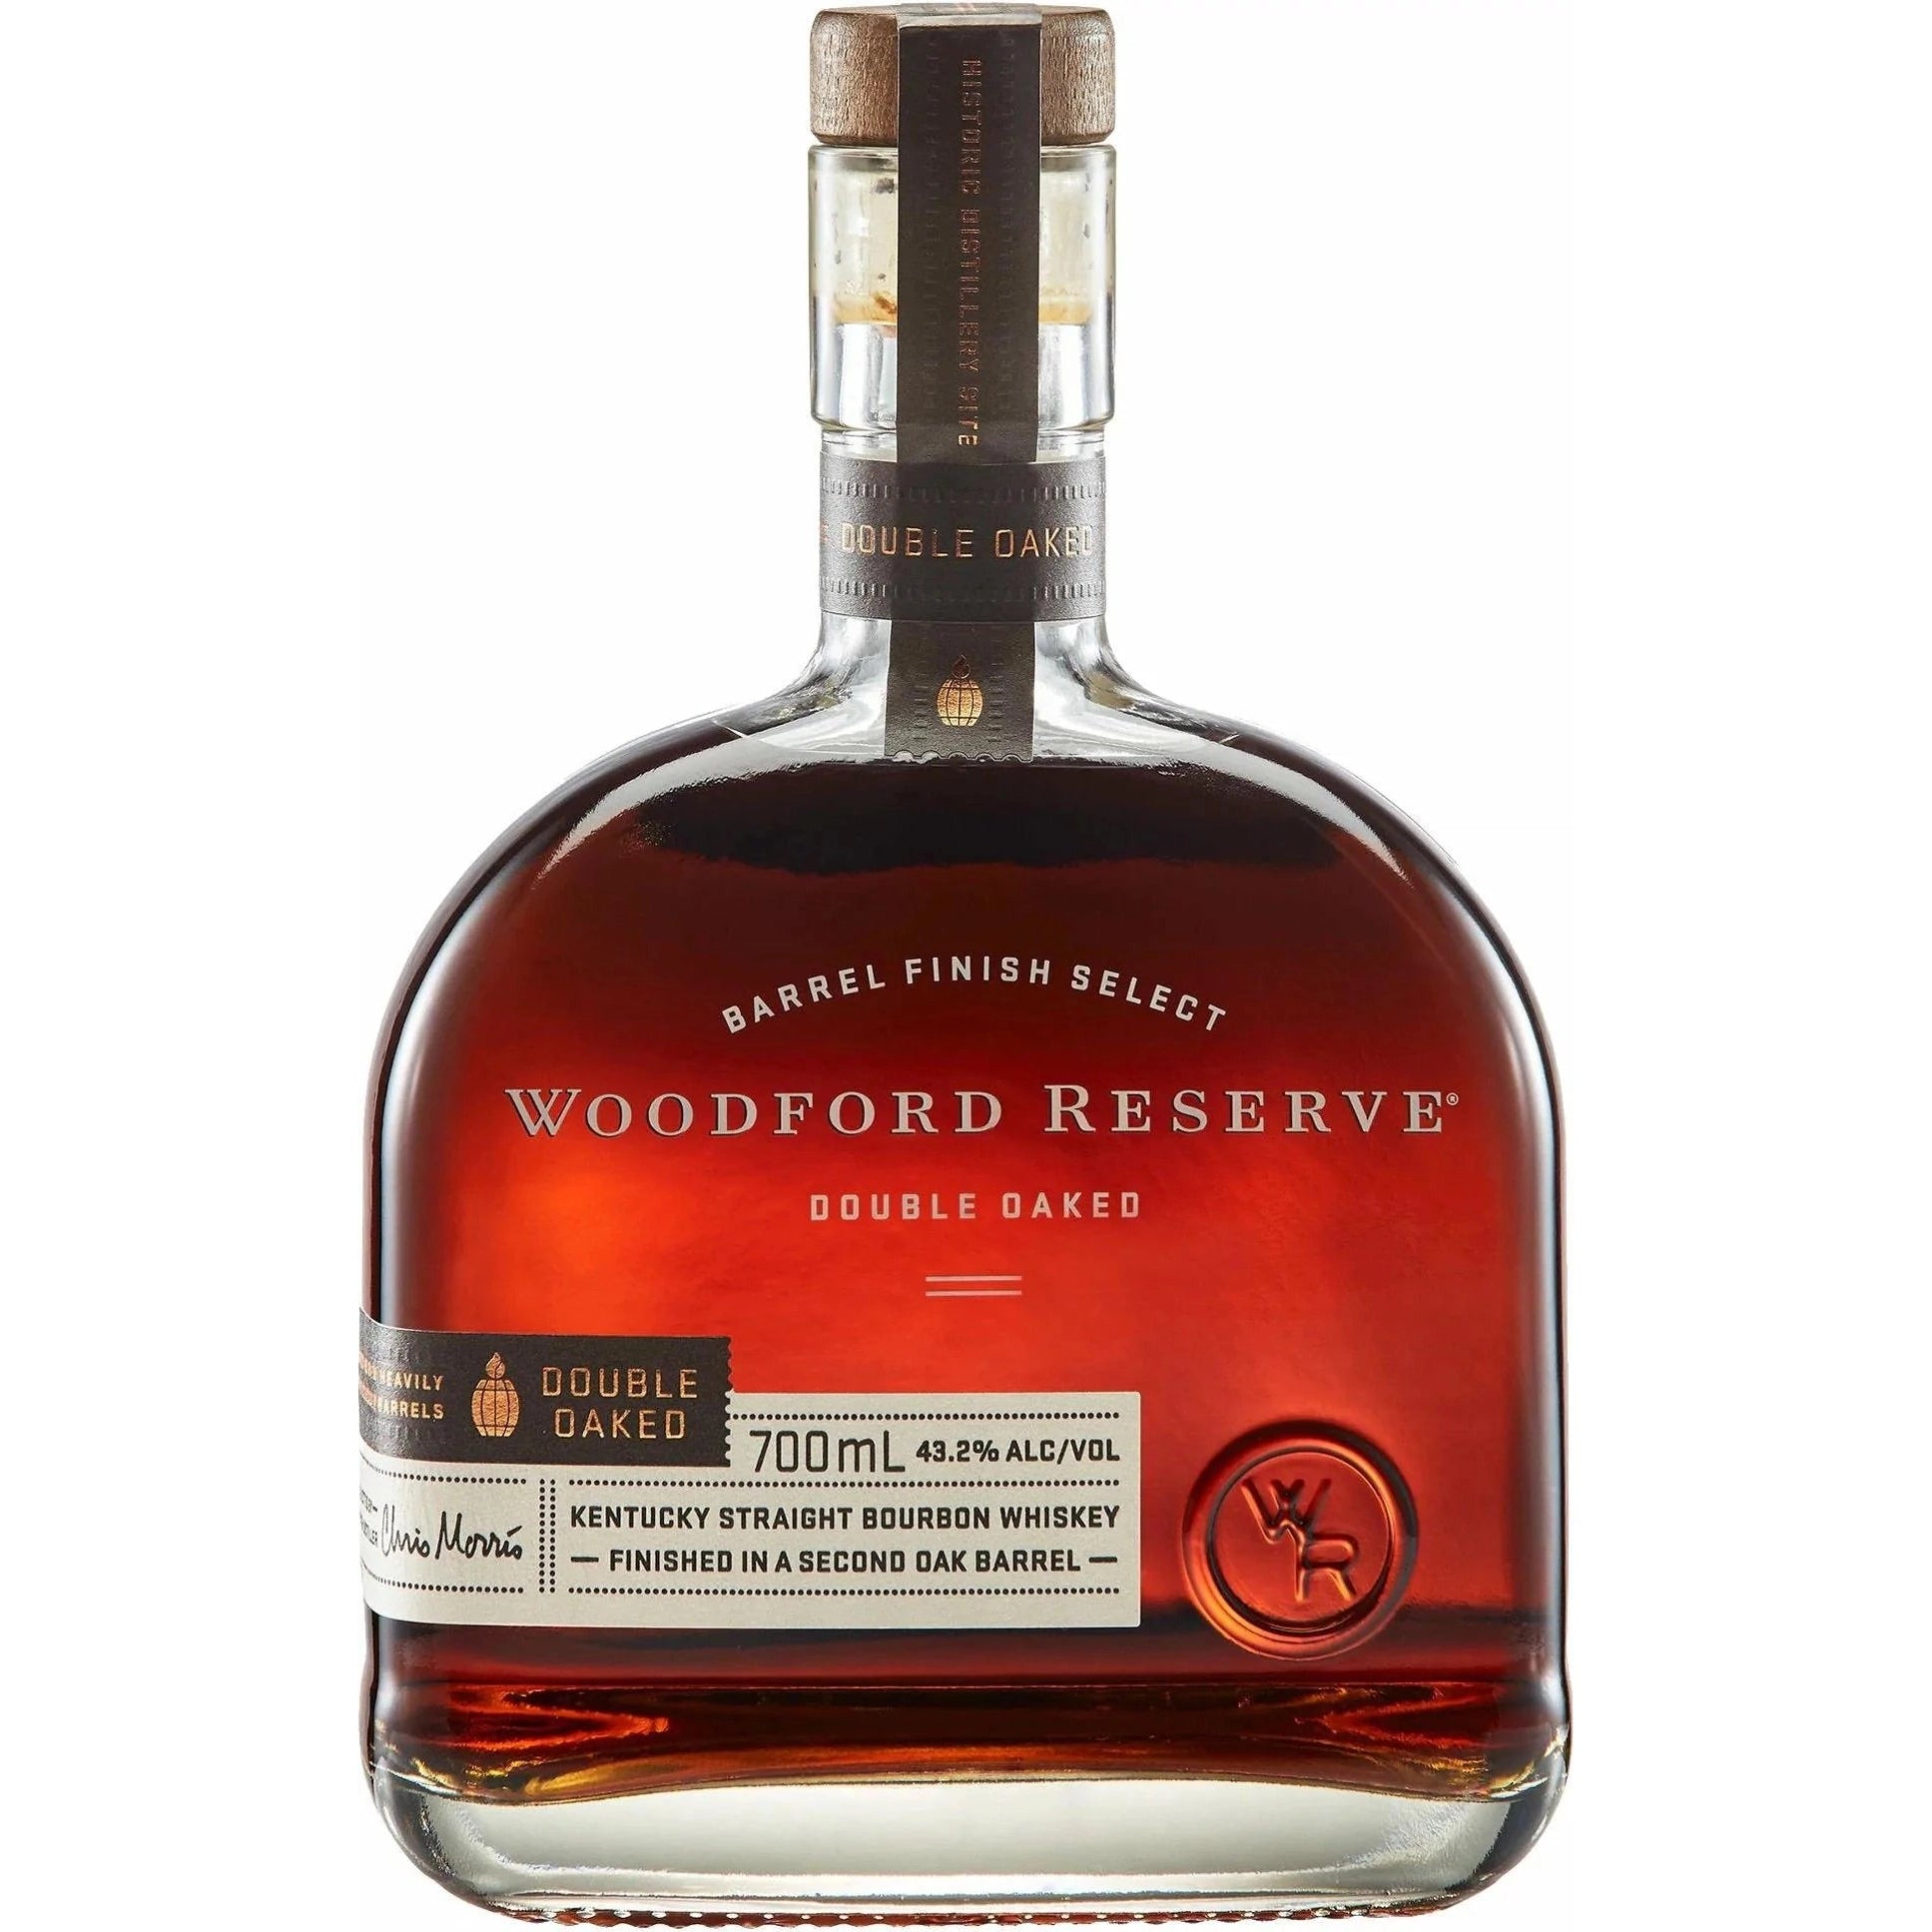 Whiskey DOUBLE Woodford Reserve 43,2% Straight Bourbon Kentucky OAKED